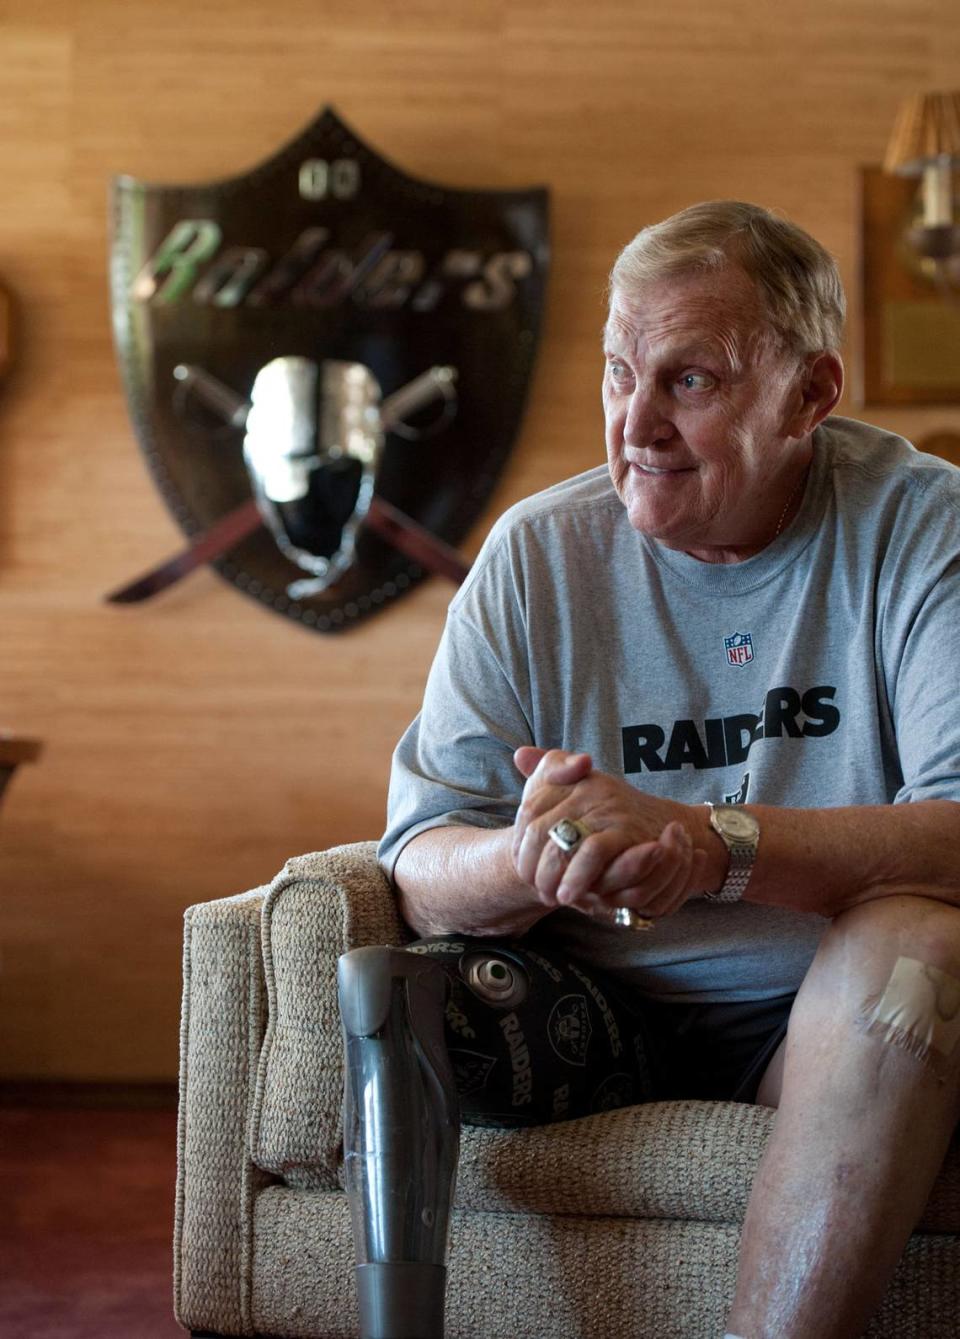 Former all-star center Jim Otto, possibly the greatest Raider of all time, talks about his long-time friendship with Al Davis in 2011 following the team owner’s death. Otto had his right leg amputated at the knee in 2007 and at one point counted 74 surgeries resulting from the ravages of professional football.